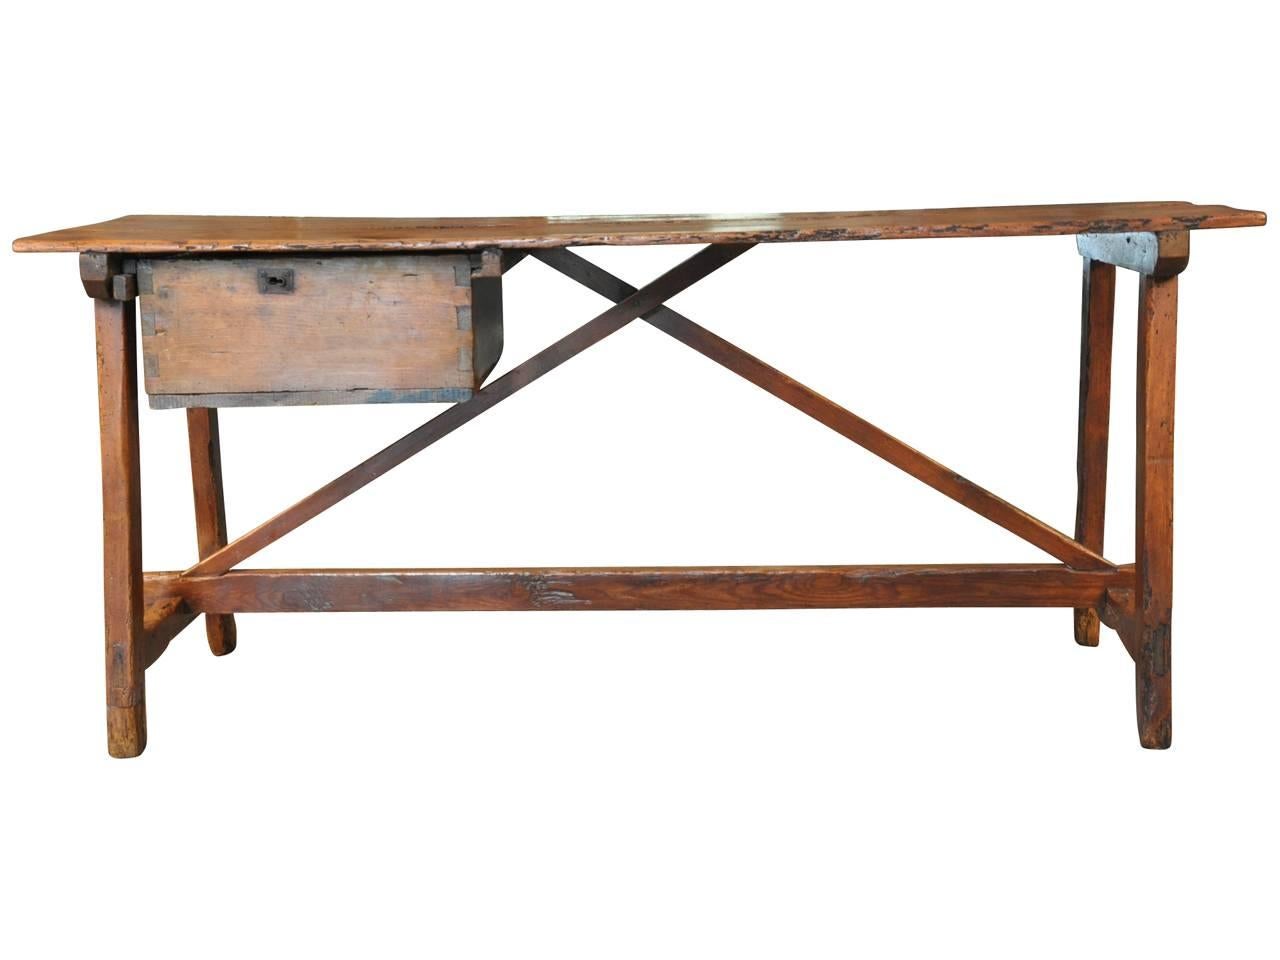 A very handsome 19th century work table - console from the Catalan region of Spain. Handsomely constructed in richly stained pinewood - terrific patina. Great as a serving piece, sofa table or console.